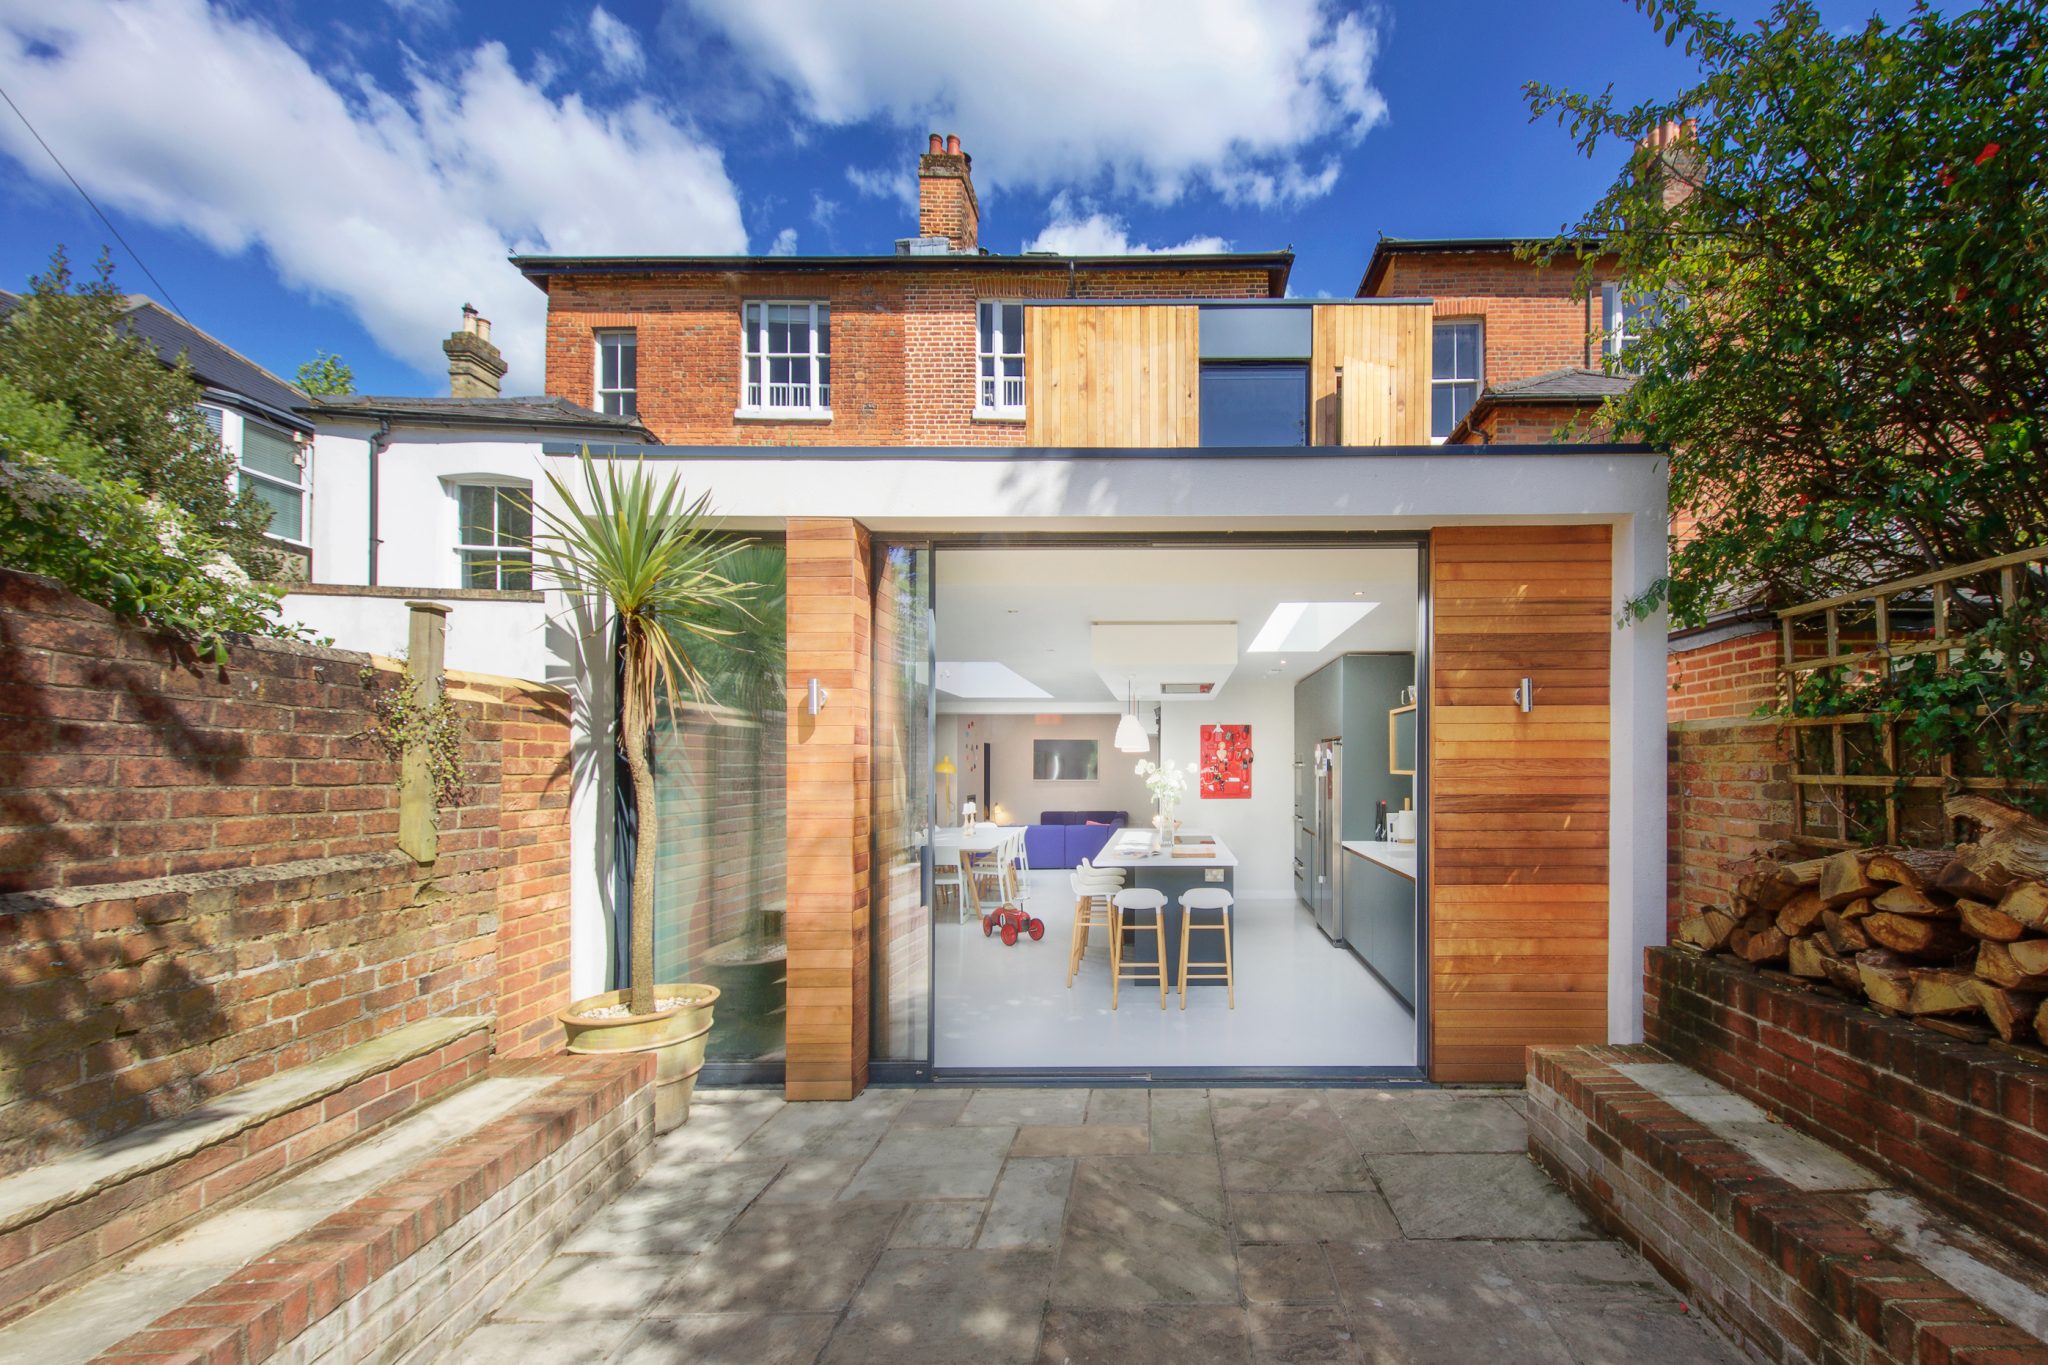 12 Best House Extension Ideas To Add More Space To Your Home - Foyr